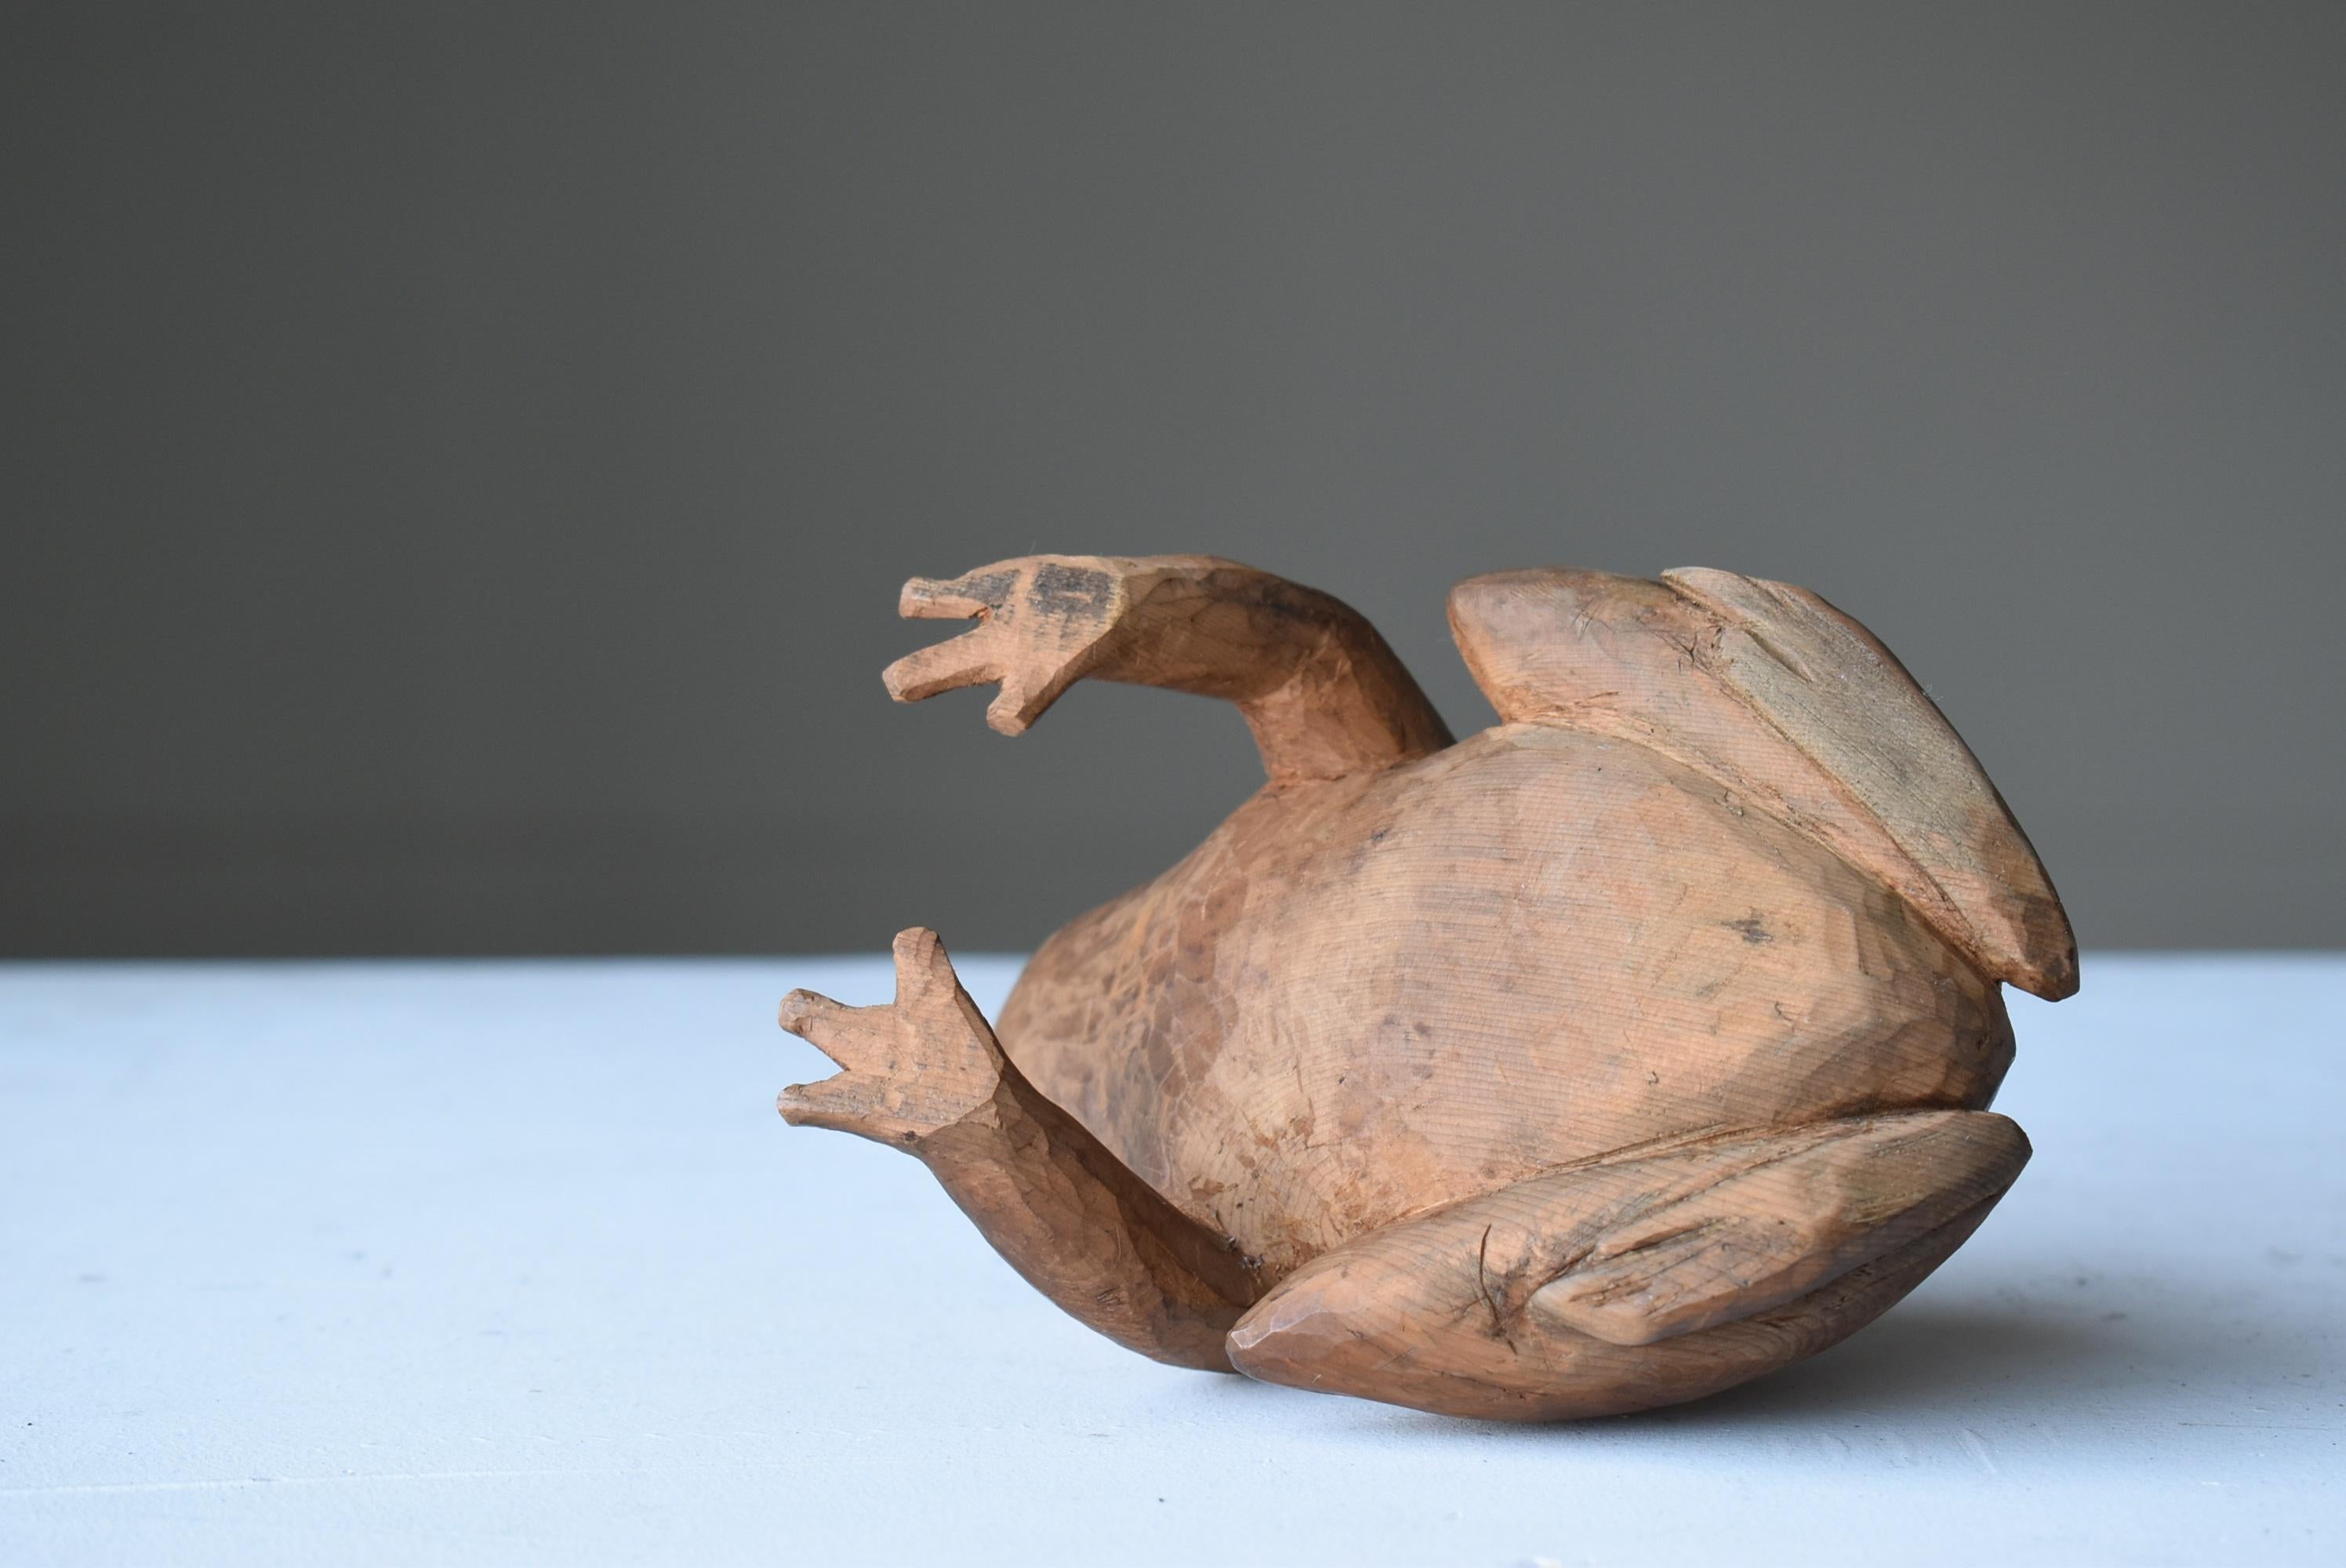 Japanese Antique Wood Carving Frog 1860s-1920s/sculpture Mingei Object 8